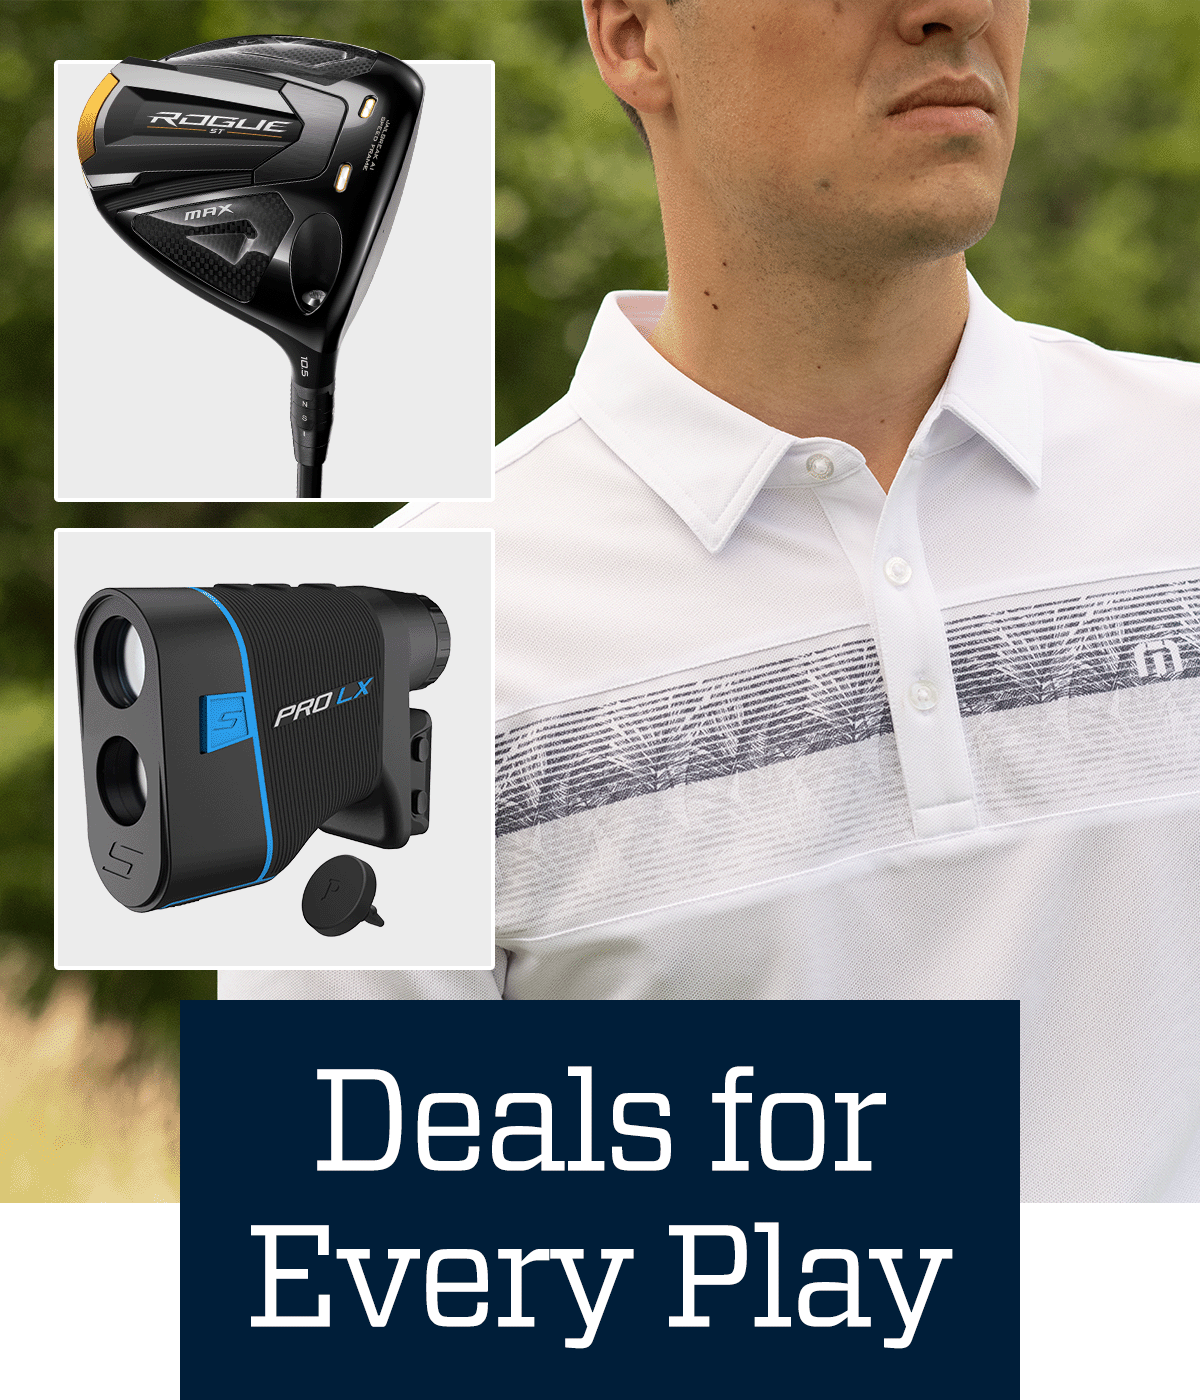 Deals for every play.